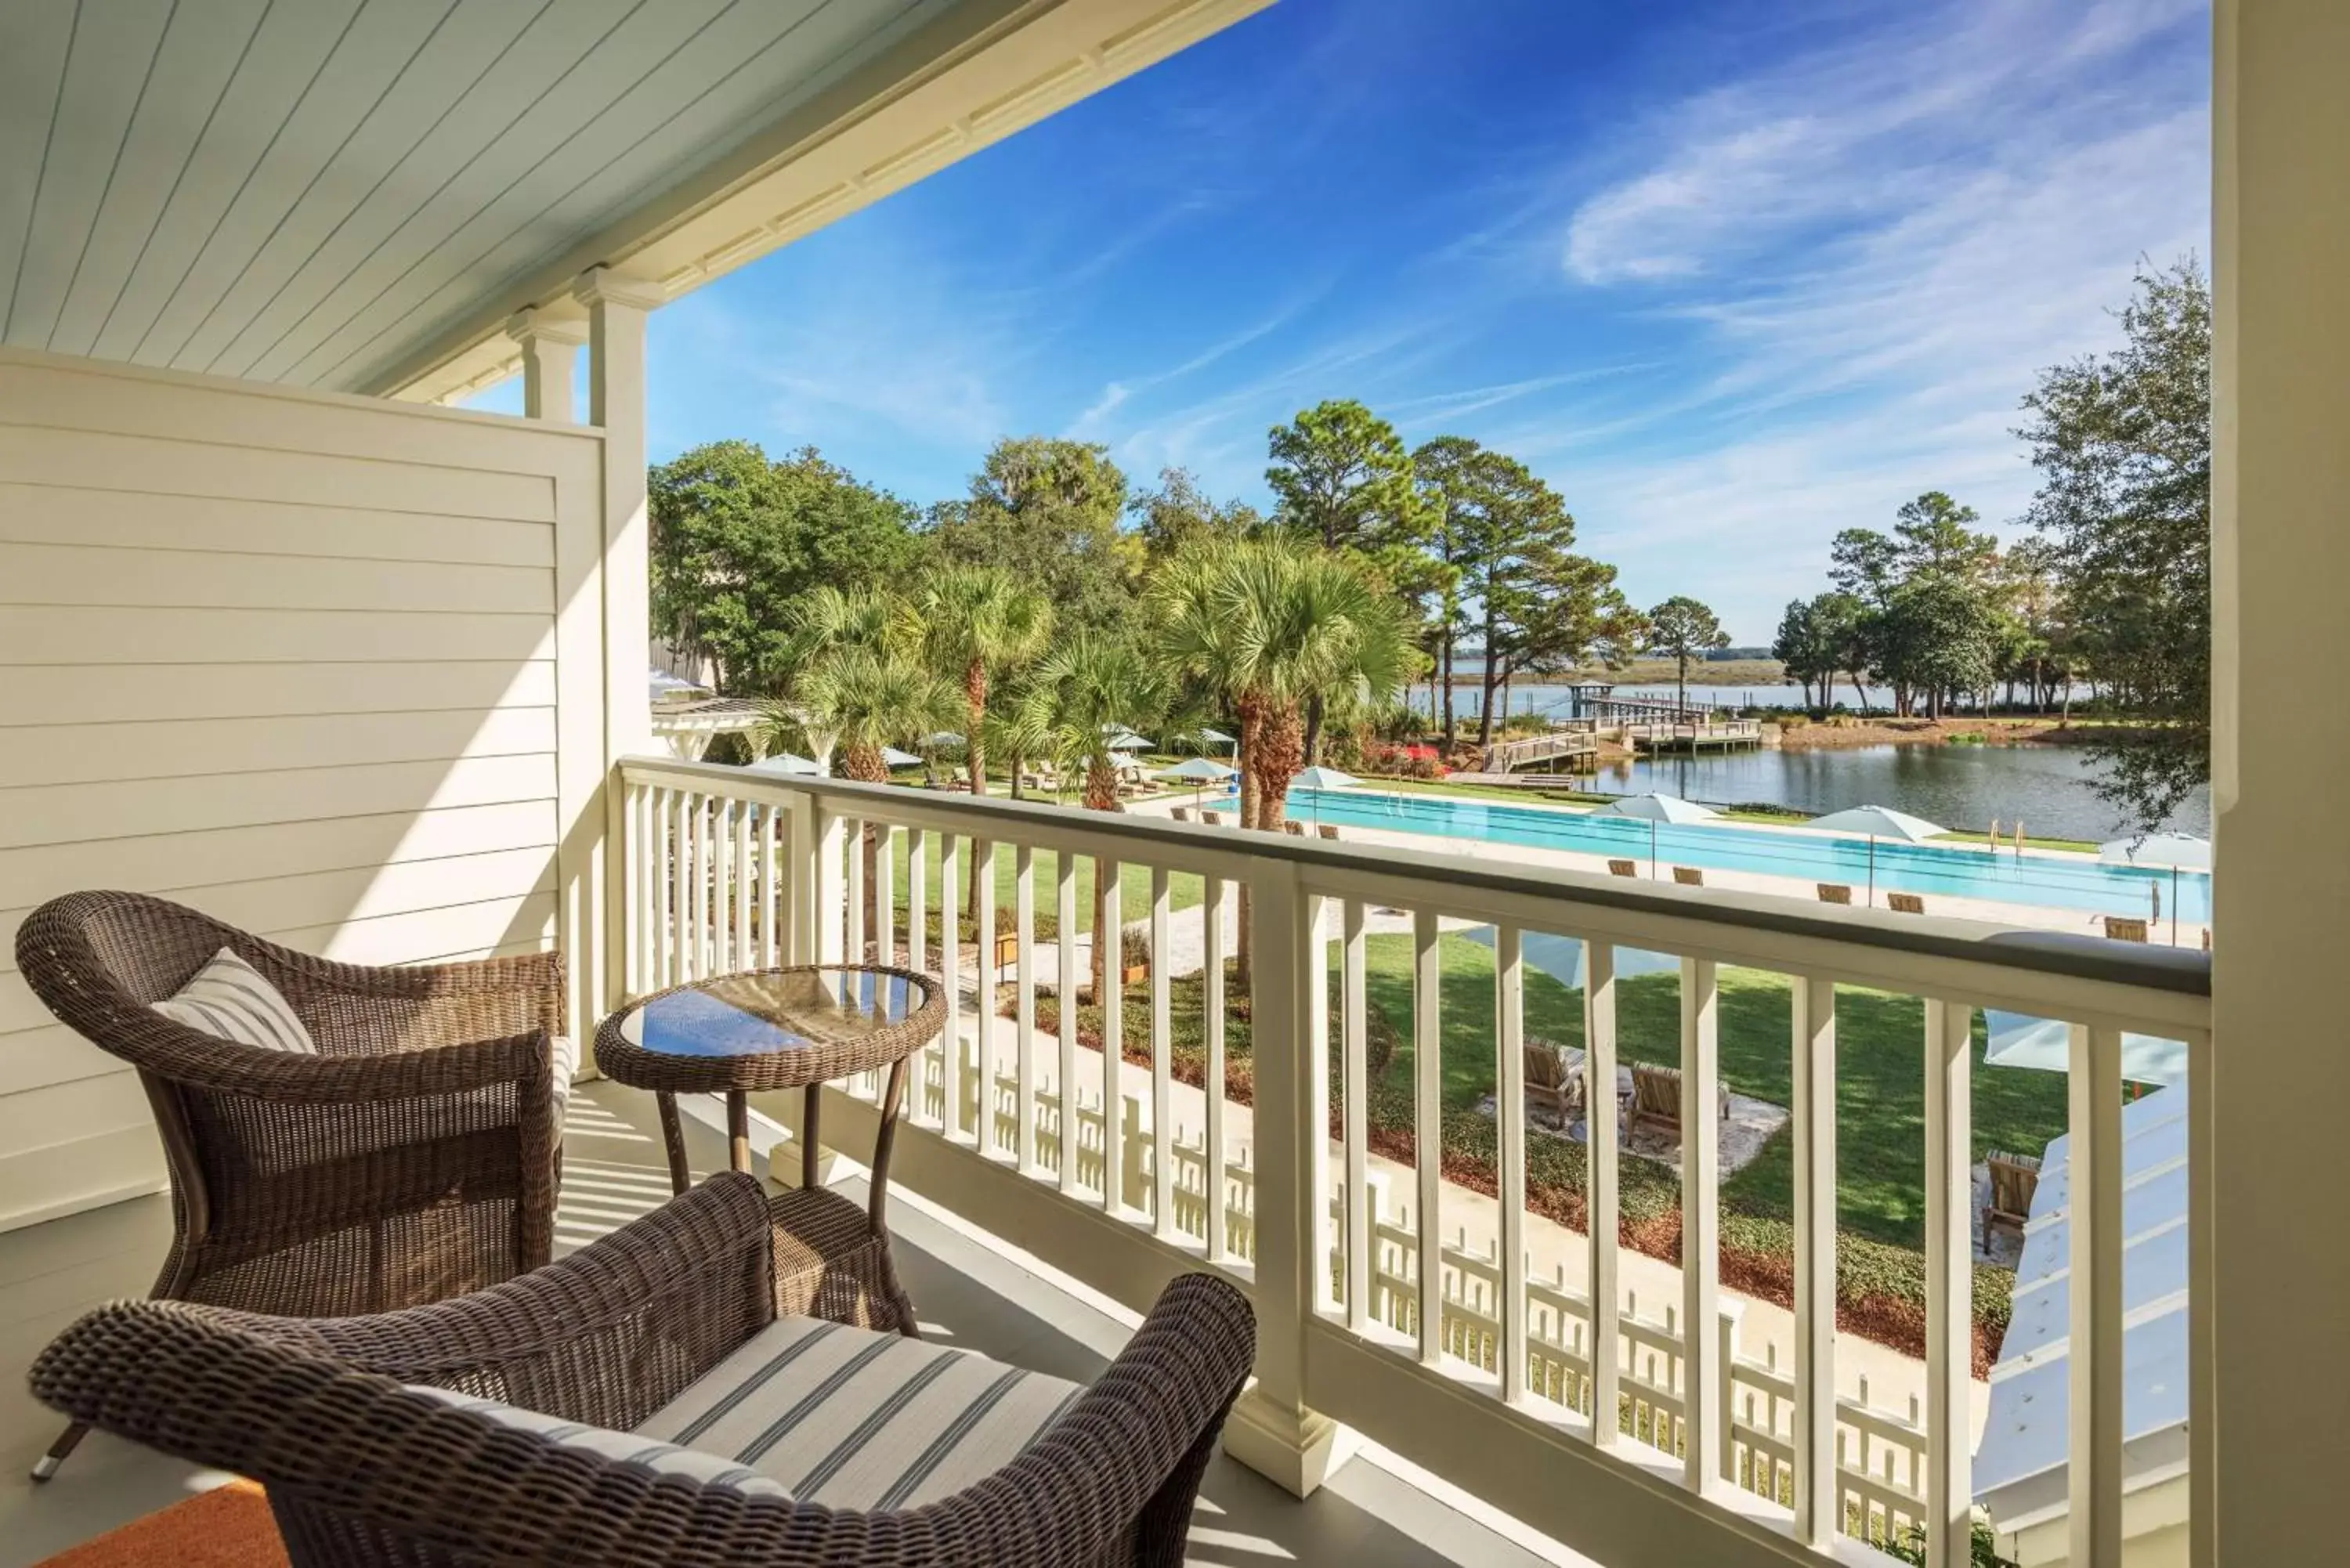 Property building, Pool View in Montage Palmetto Bluff